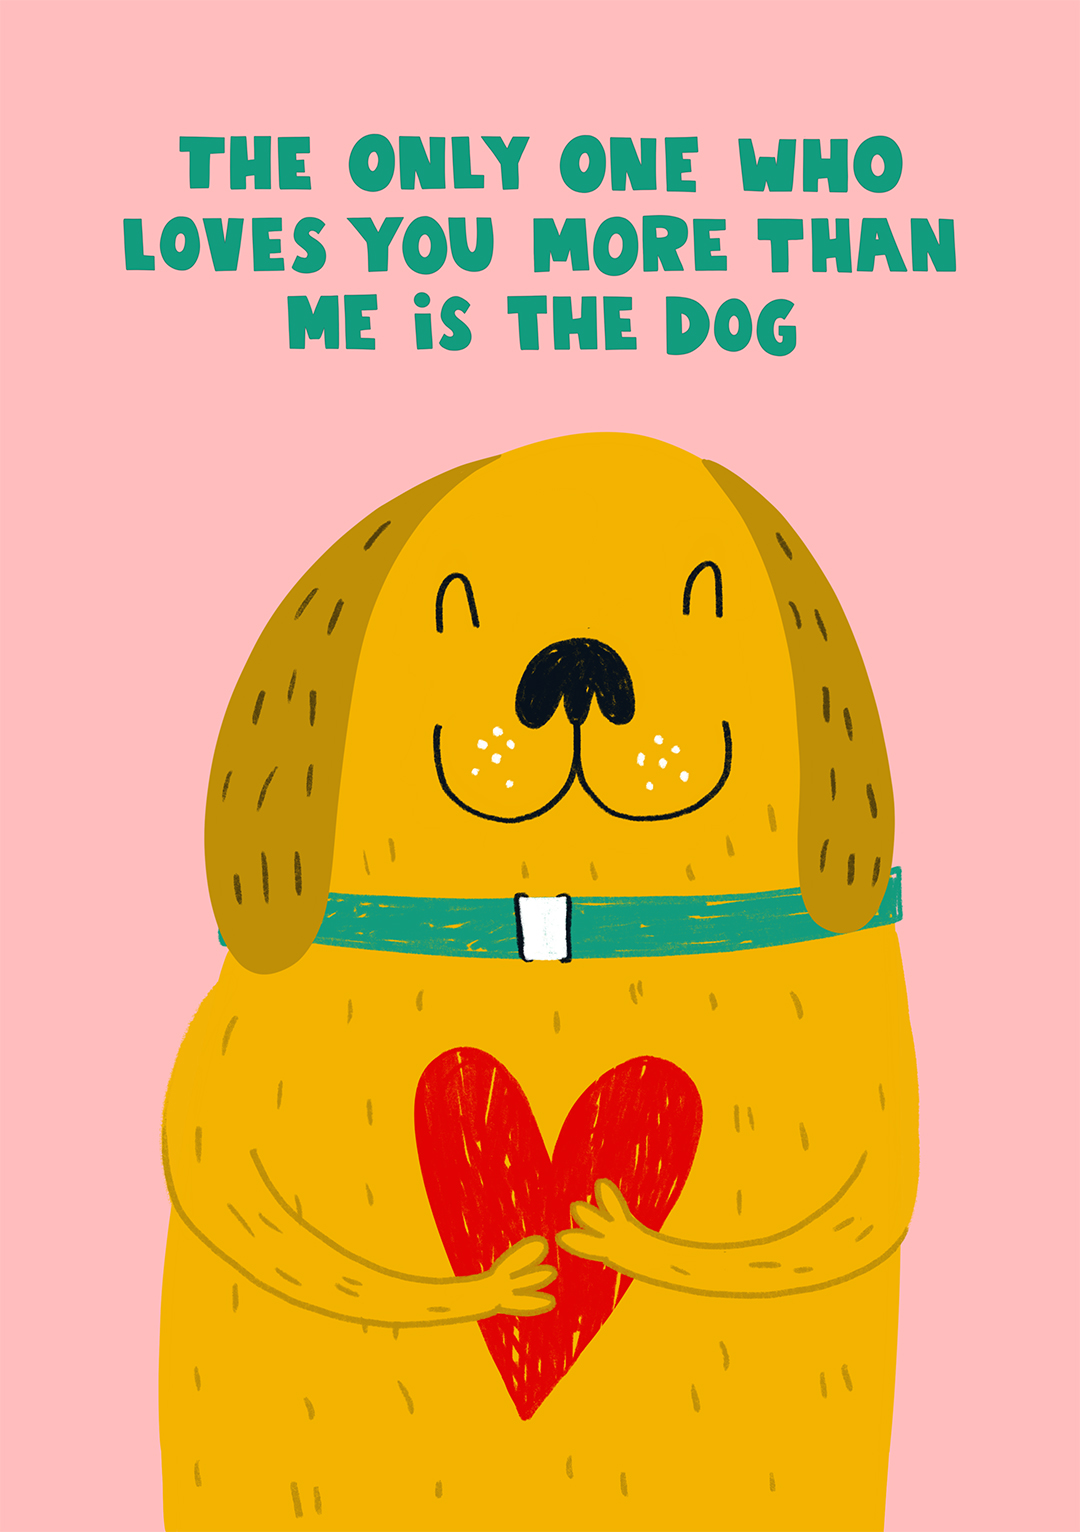 The Dog Loves You More - Valentine's Day Card